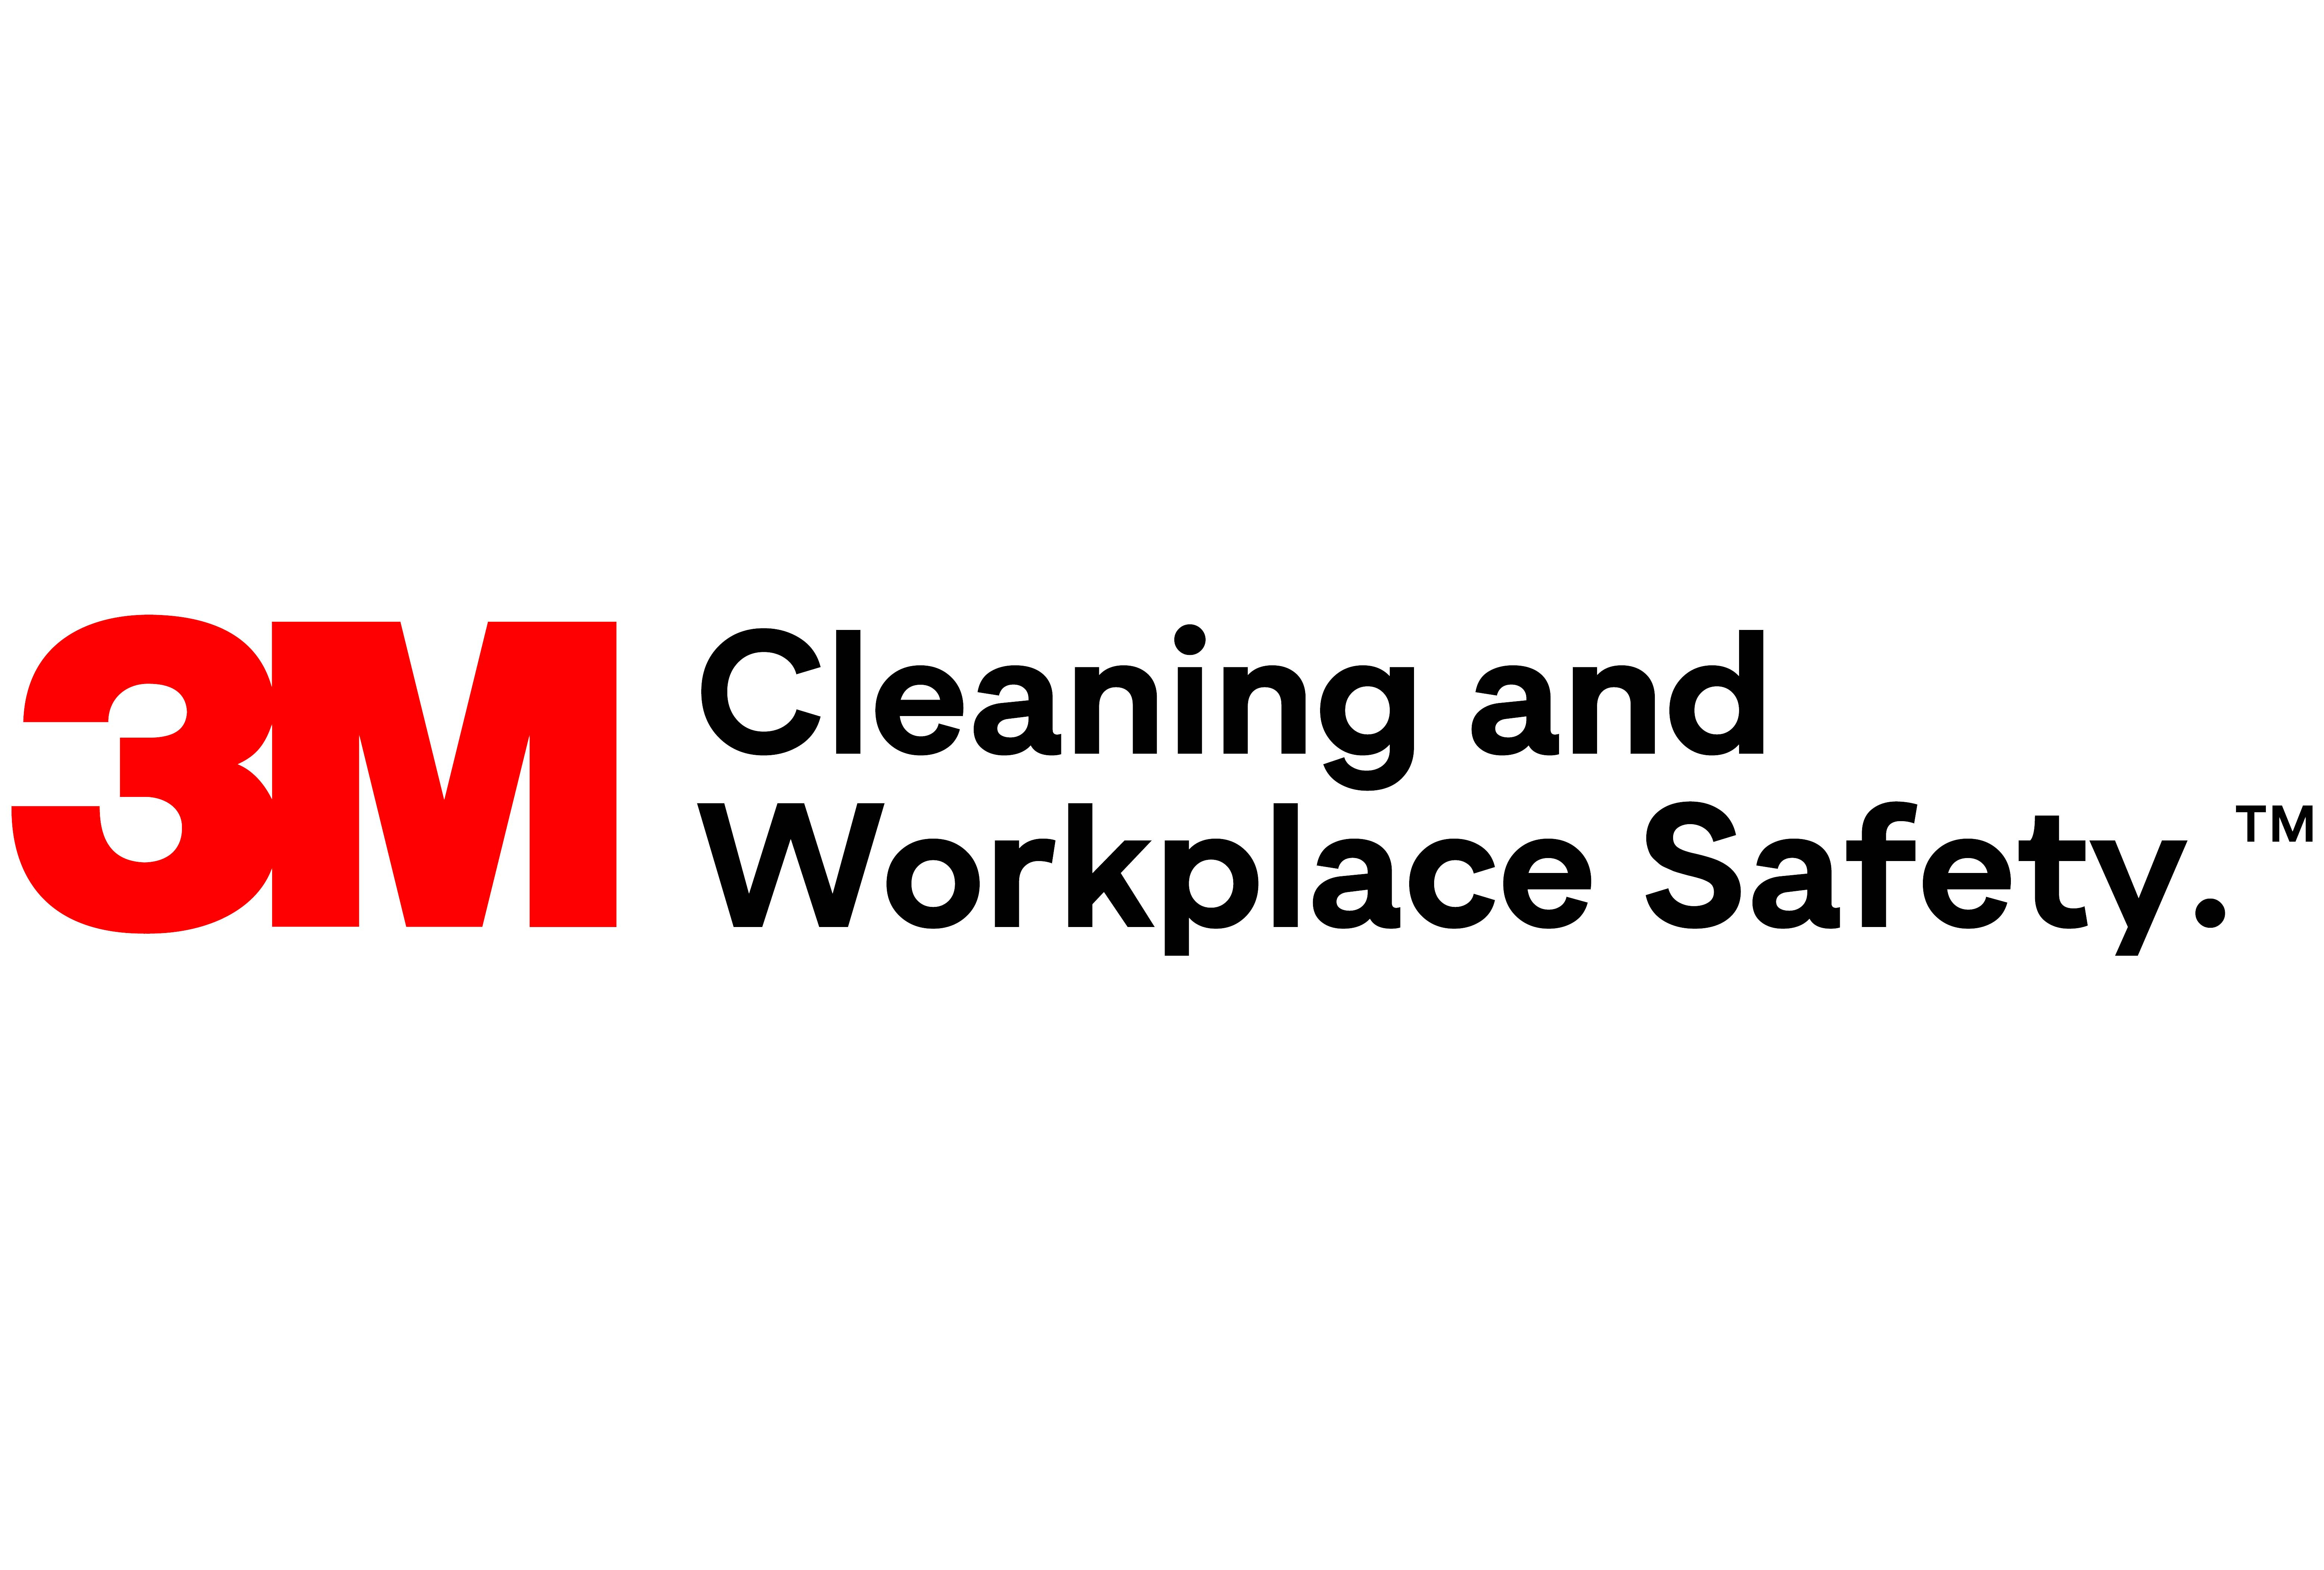 3M Cleaning and Workplace Safety